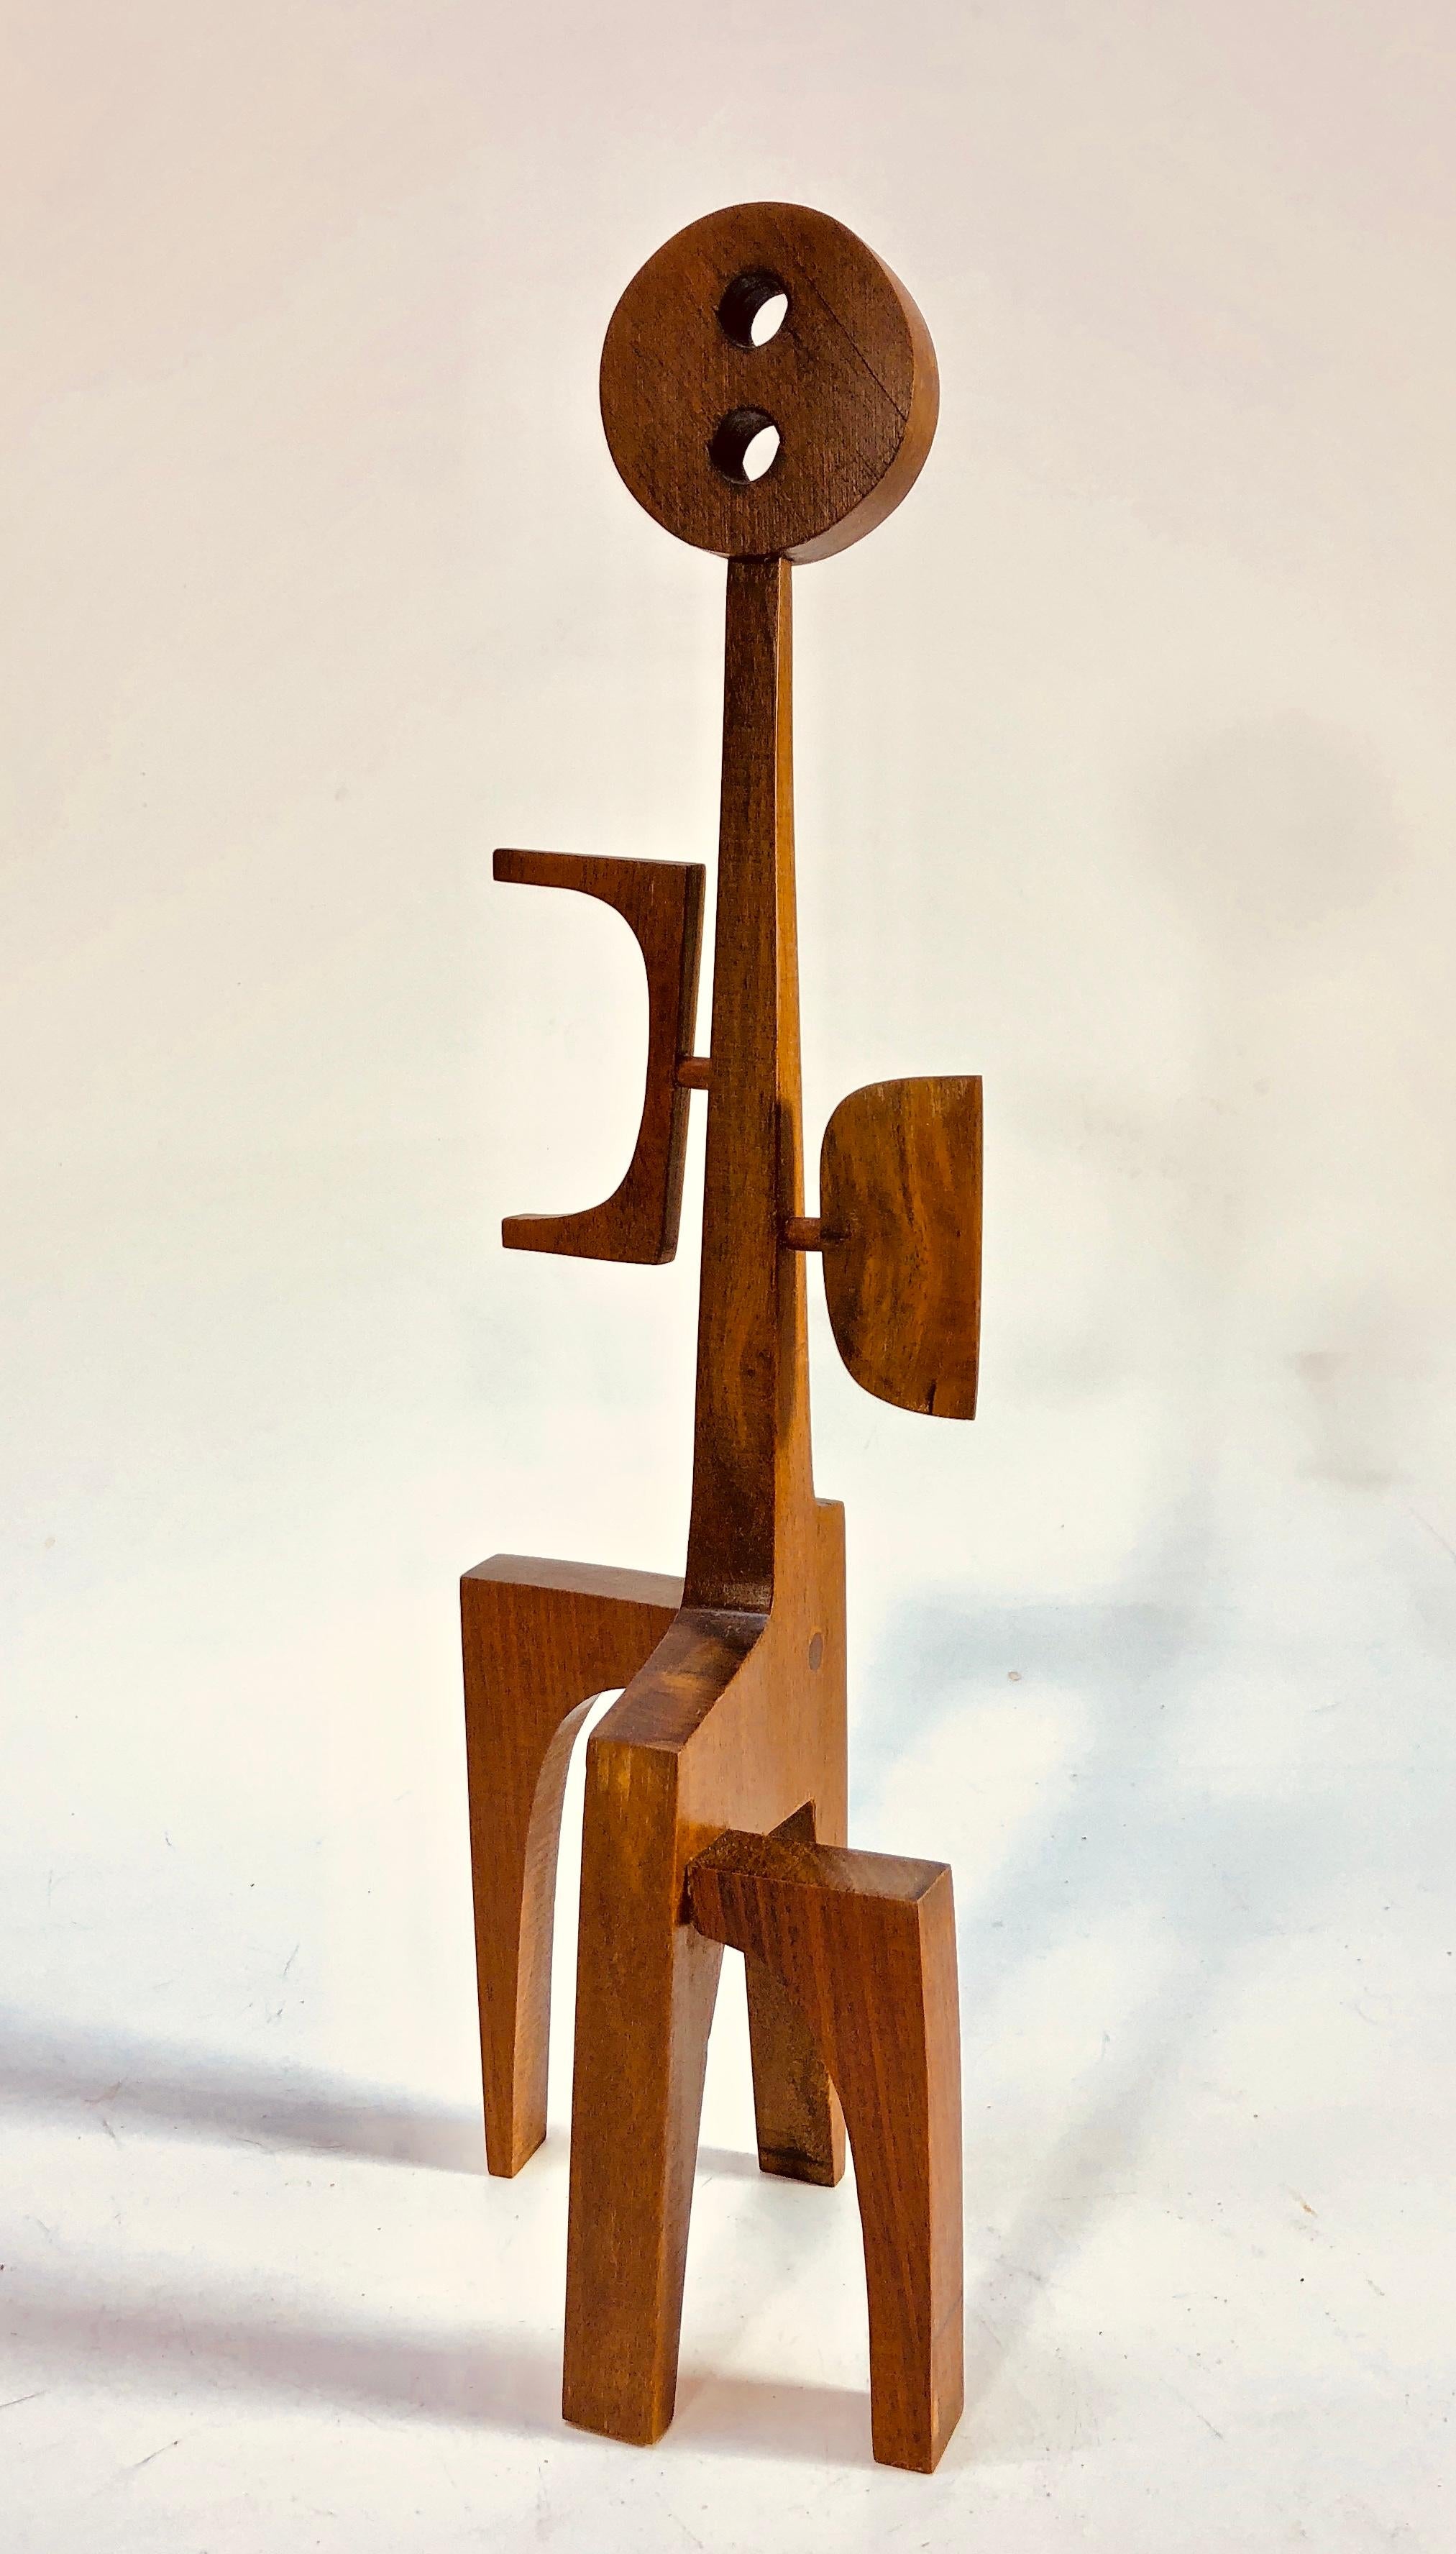 Female #3, a modernist sculpture by American artist Adam Henderson. This wonderful, totemic figure carries fertility symbols in the mid section. Signed on the back of the bottom back leg.